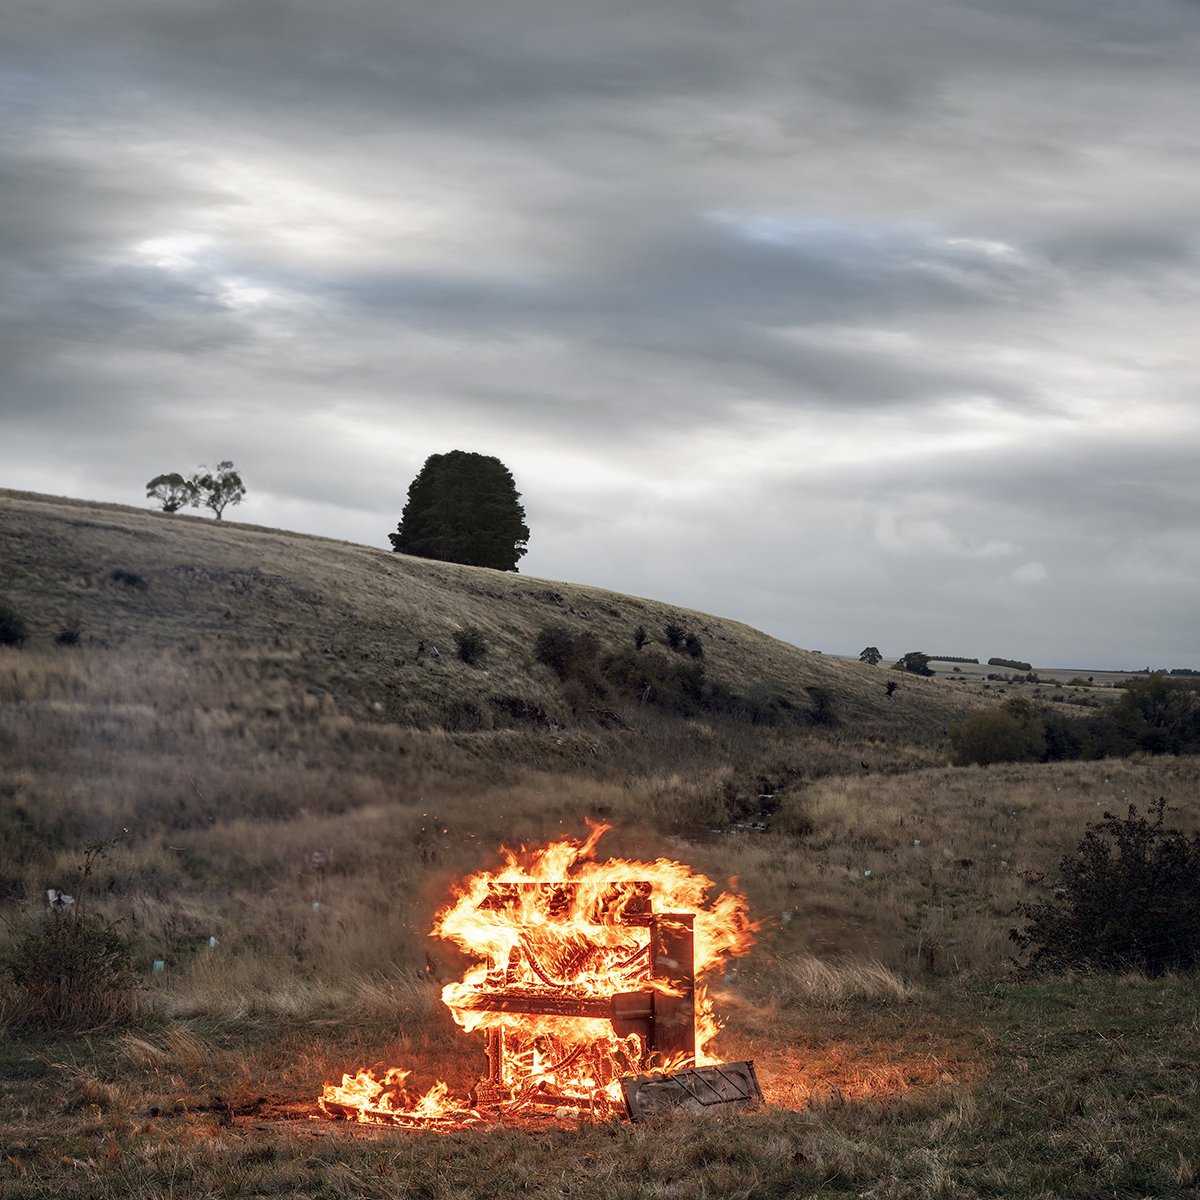   Burning Ritual , 2021, Archival pigment print, edition of 5 + 2 A/P, 1/5, 90 x 90 cm 